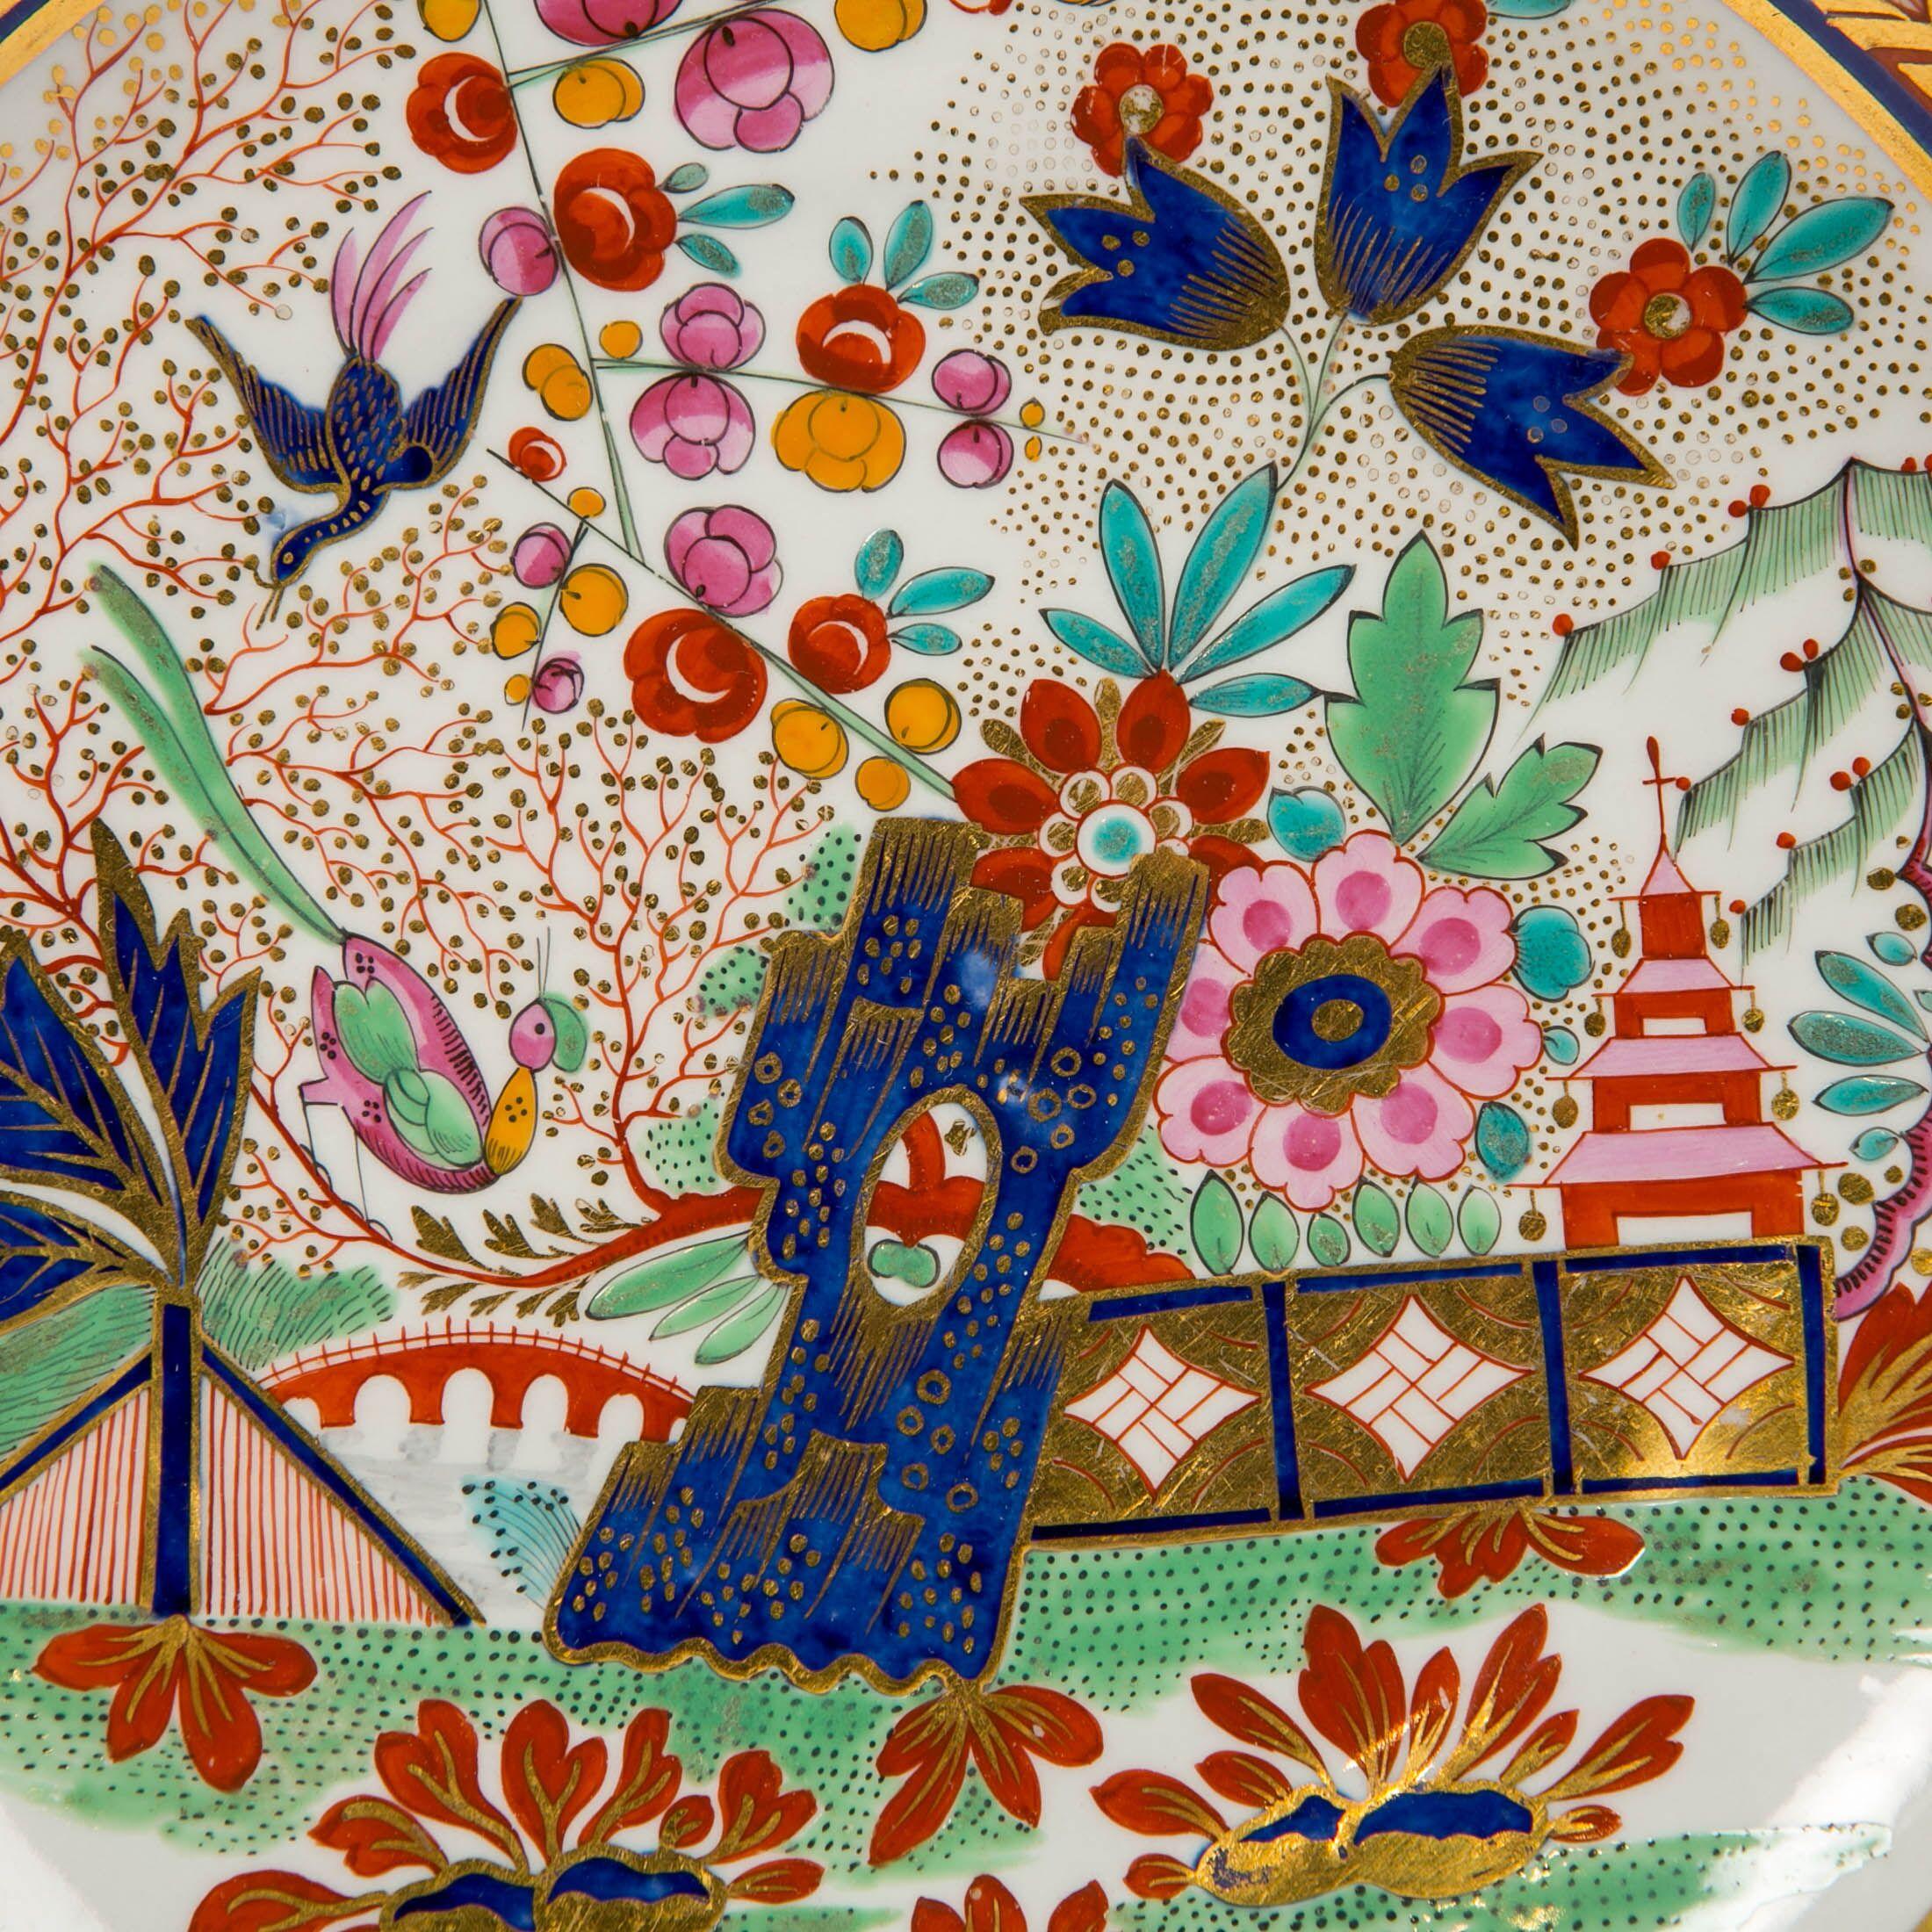 Why we love it
Fabulous colors and a dreamy design!
We are proud to offer this hand painted Barr Worcester saucer dish. The painting is an English interpretation of a Chinese landscape scene with a pagoda and flowering garden. The marvelous